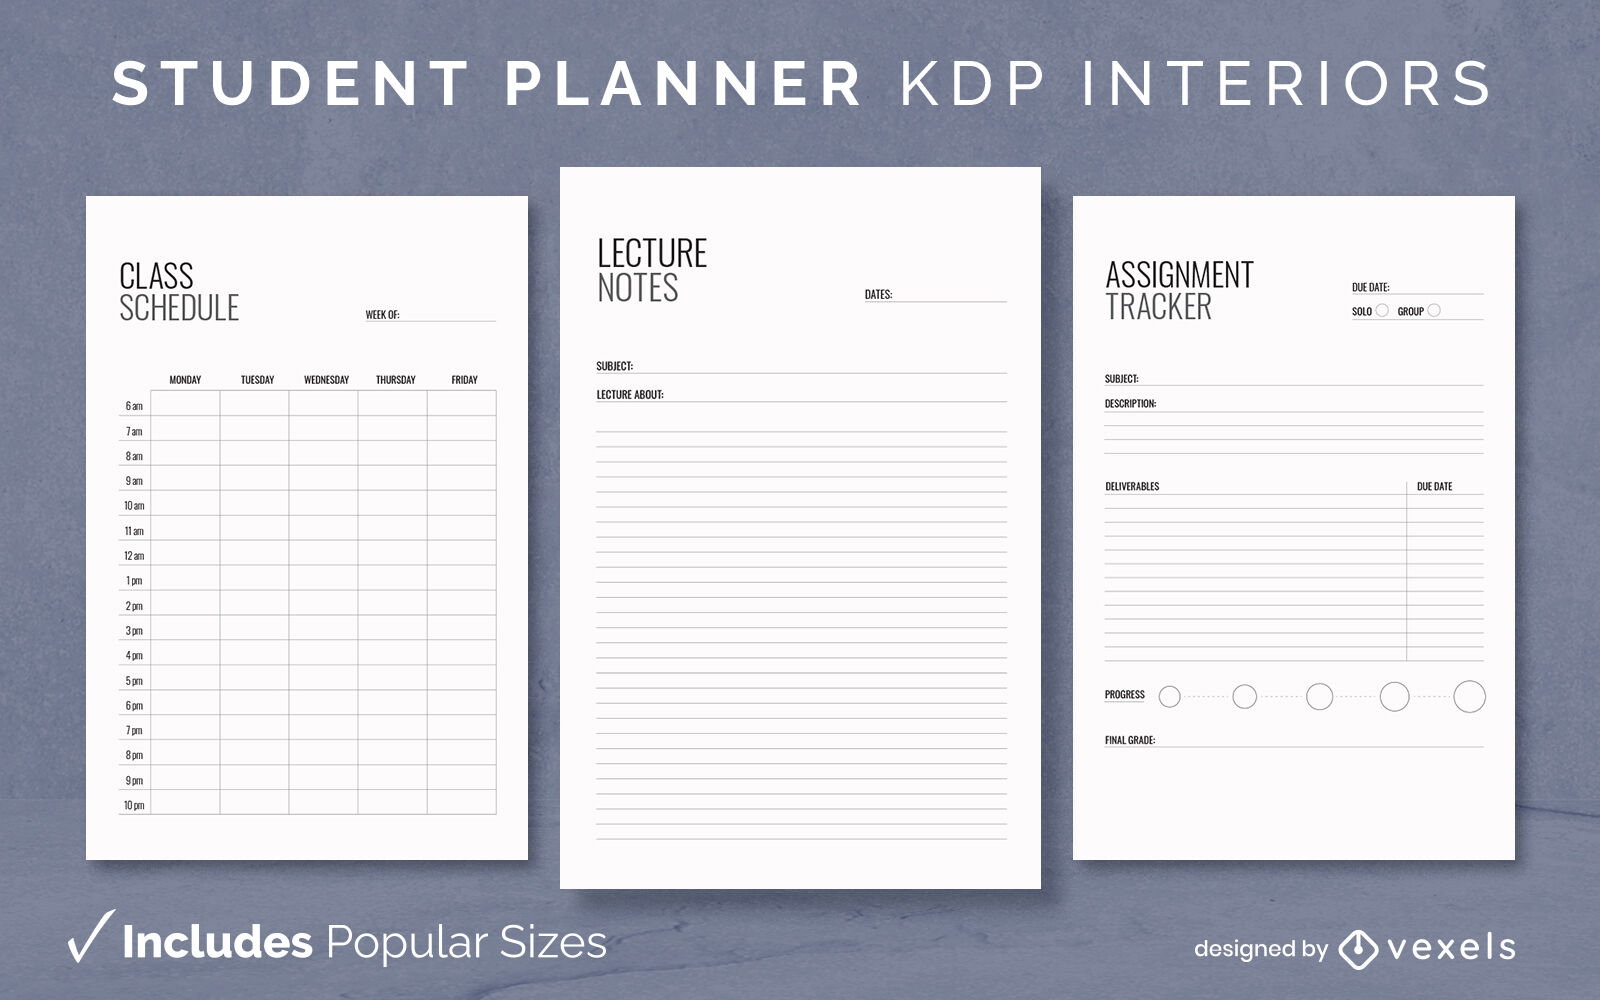 Student planner diary design template KDP